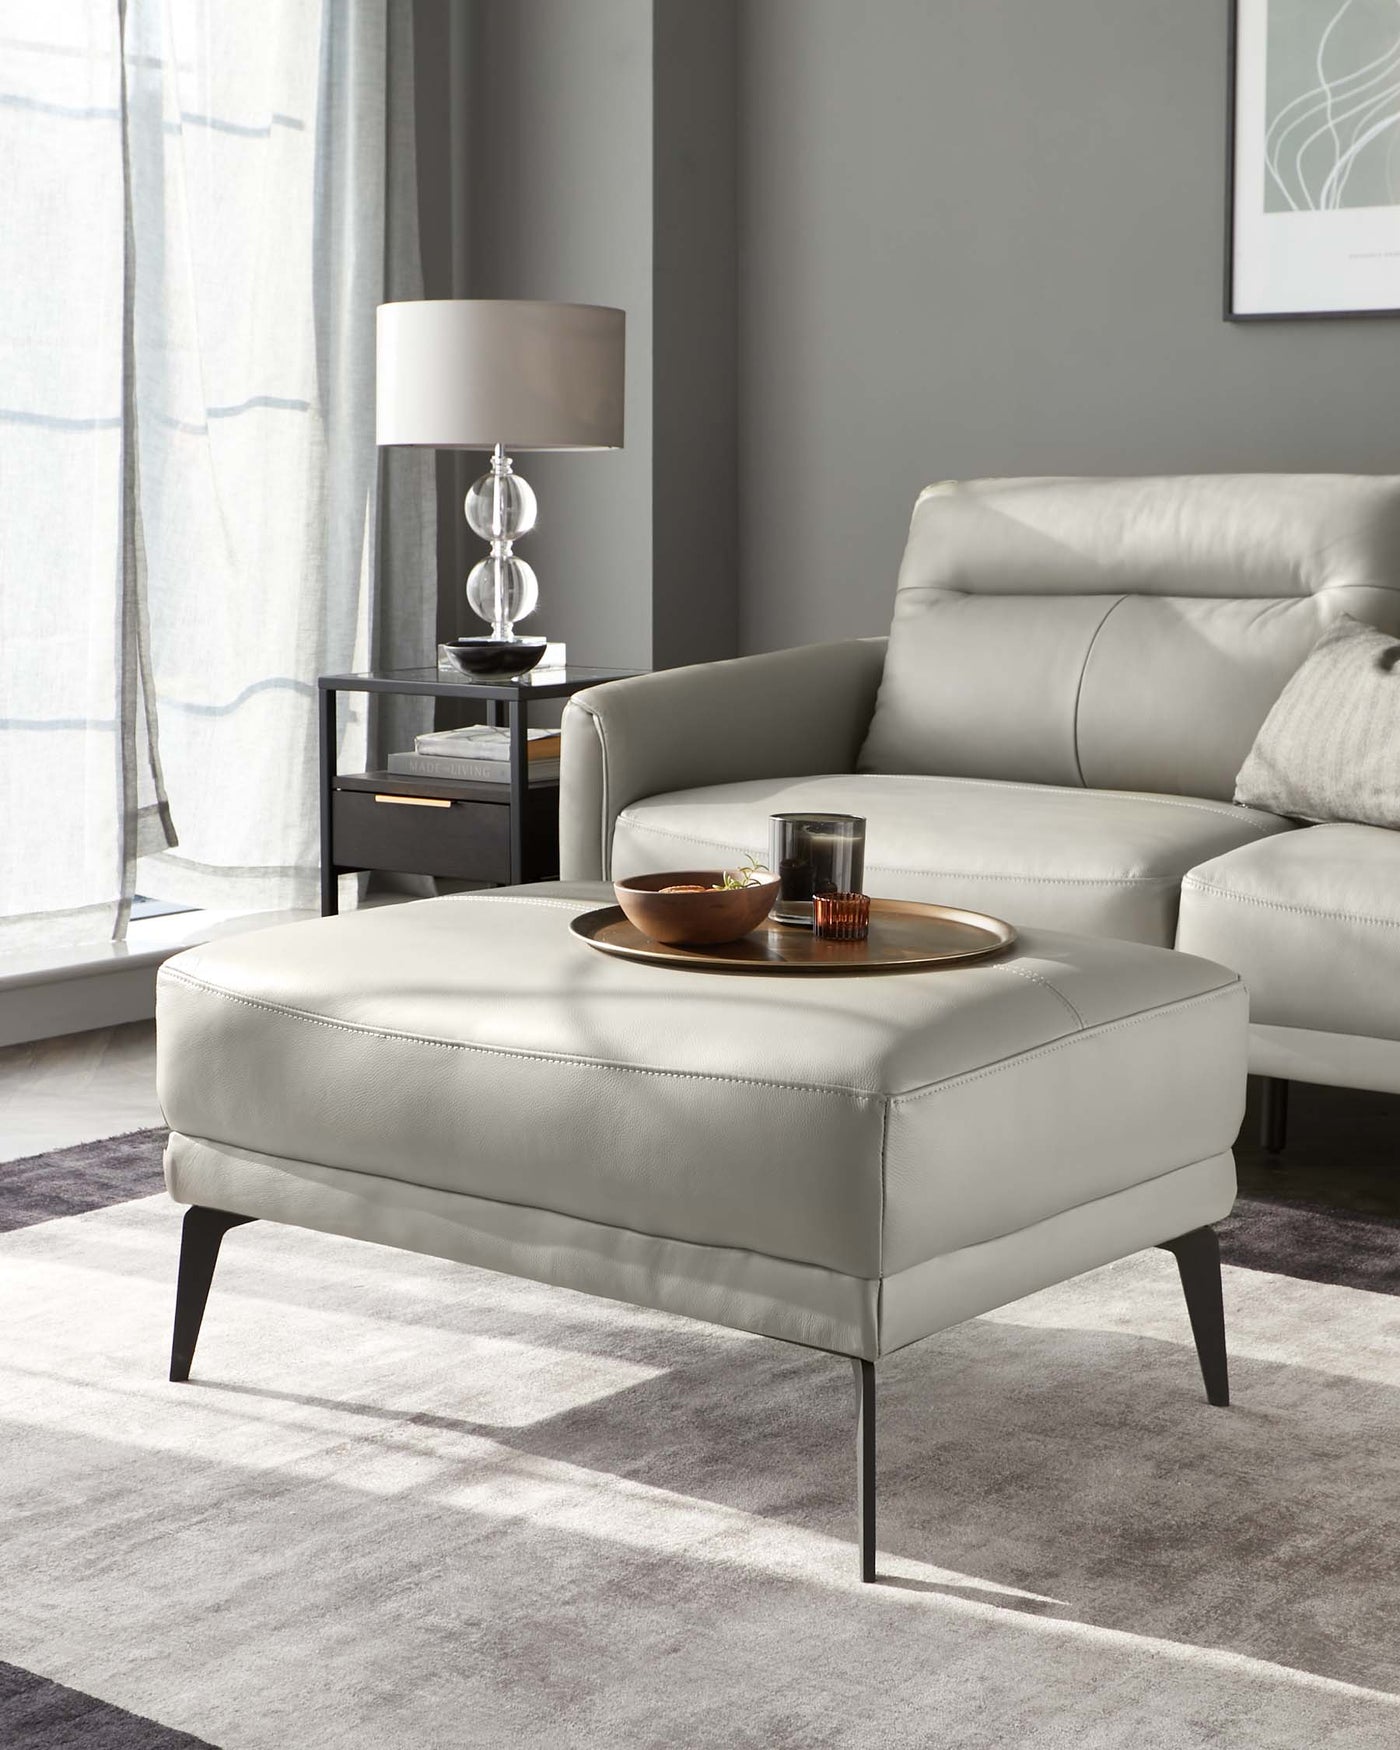 Contemporary light grey leather armchair and matching ottoman with slender dark metal legs, paired with a minimalist black metal side table featuring a sleek table lamp, set on a soft grey area rug.